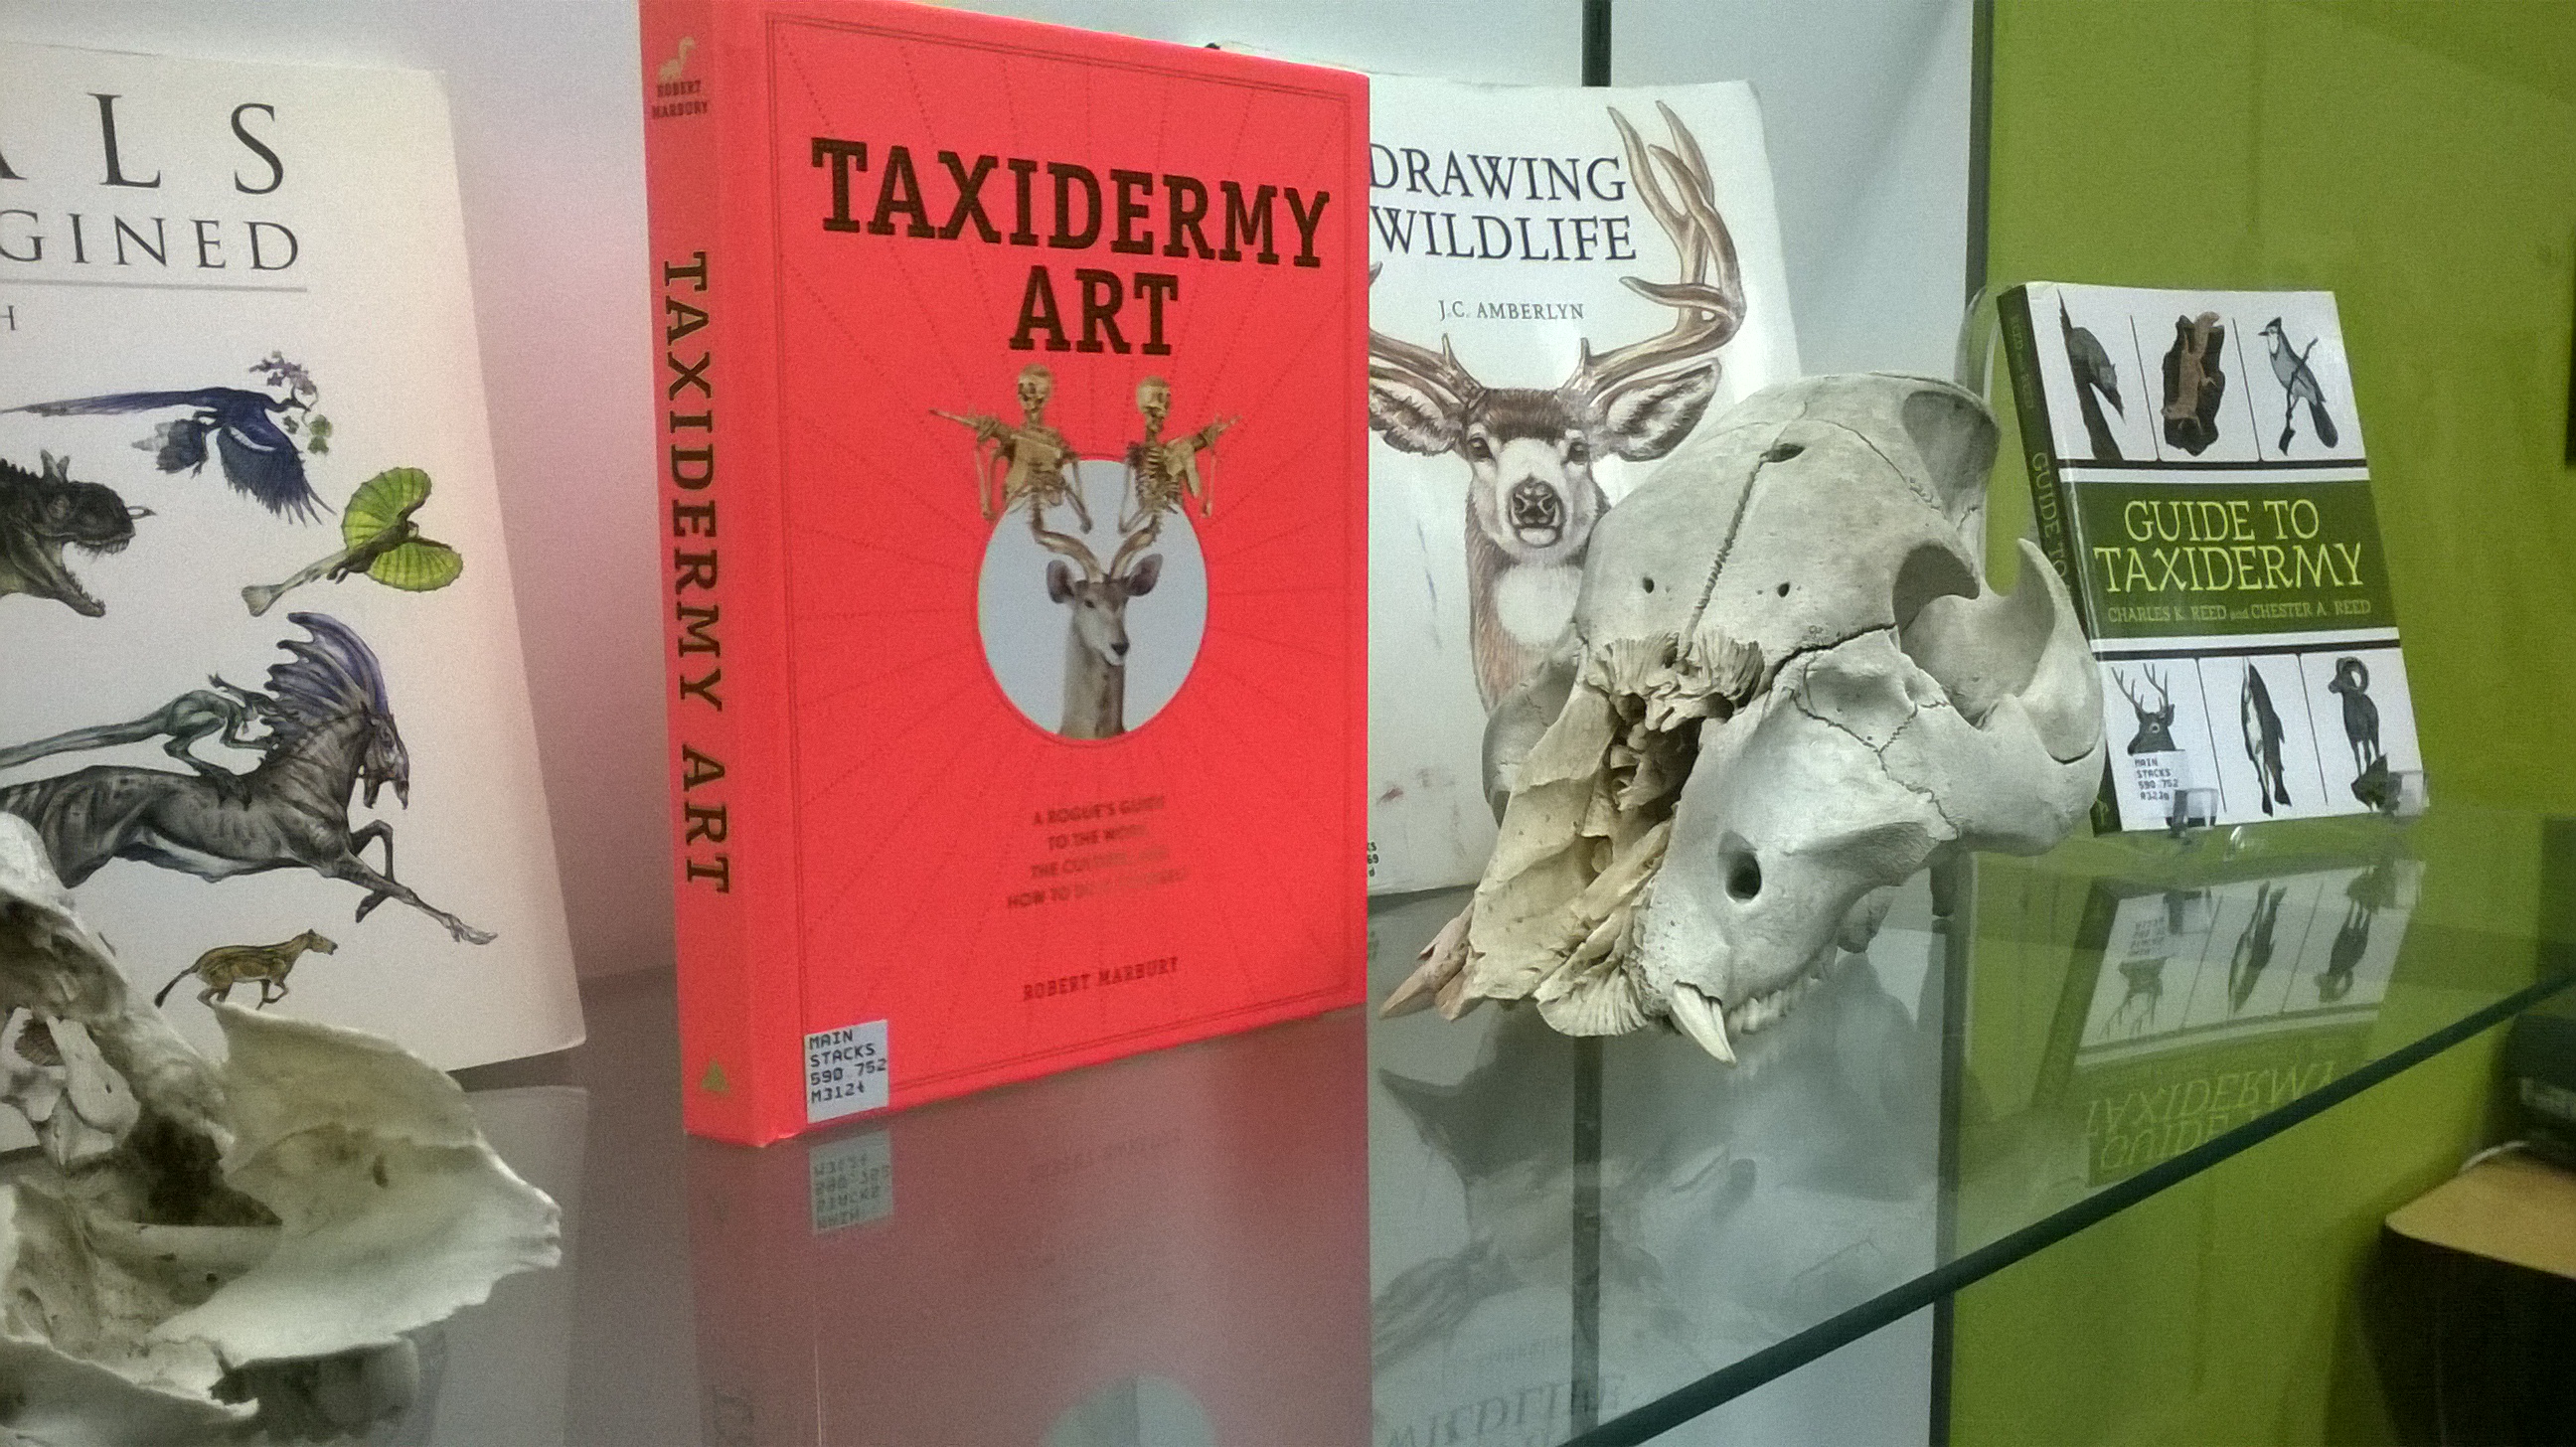  Taxidermy art. There is an animal skull on display next to the book.